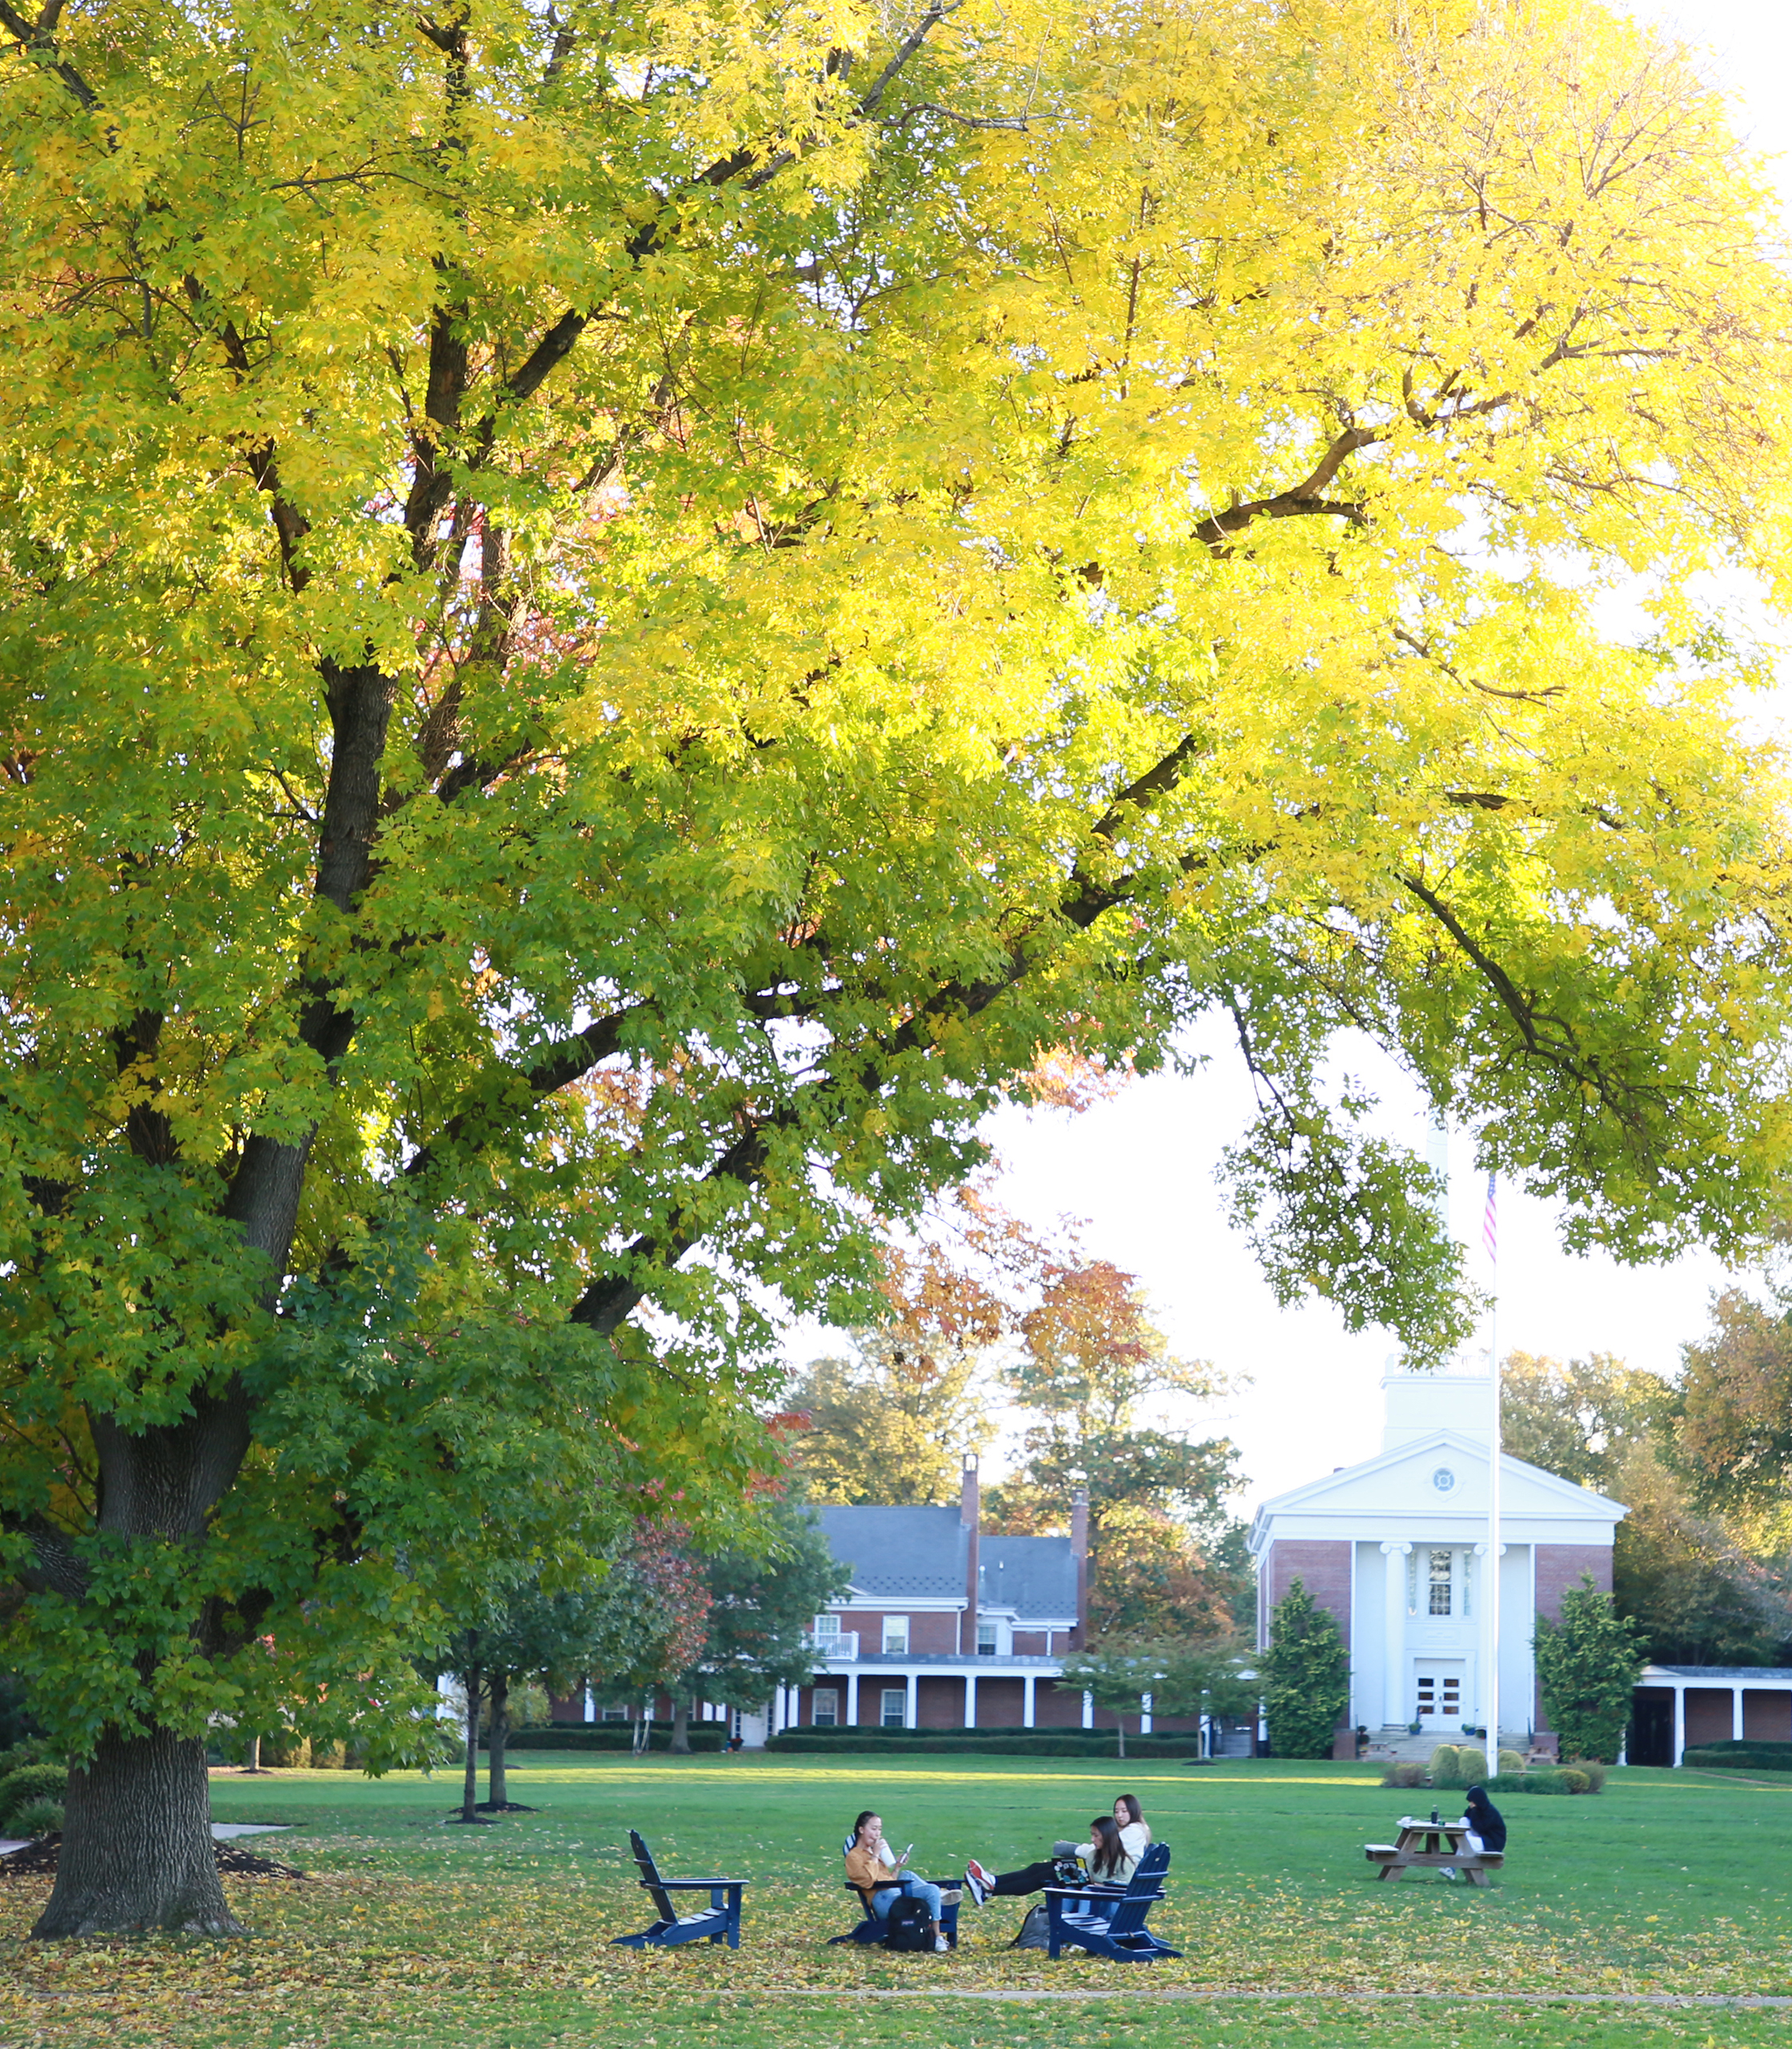 sunlight peering in through the green full trees with chapel framed in the background and students sitting on chairs in the foreground